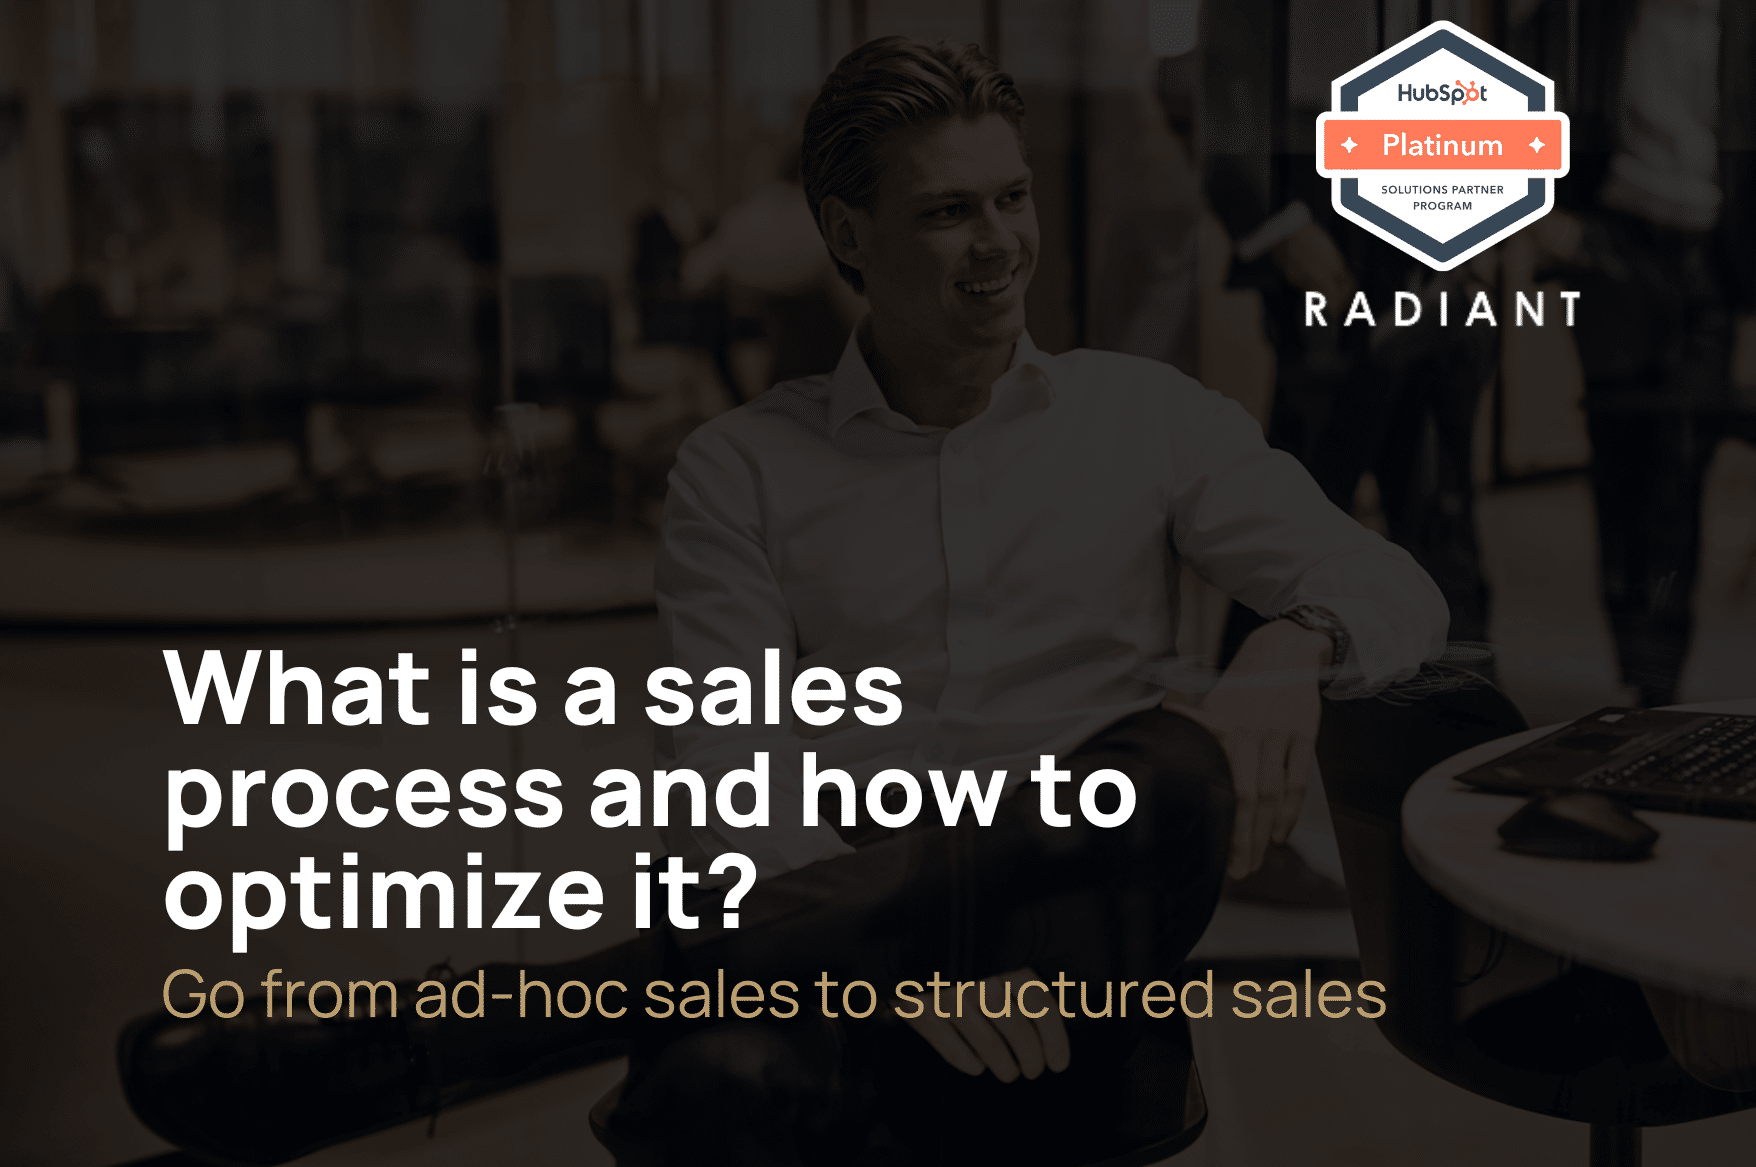 What is a sales process and how to optimize it?